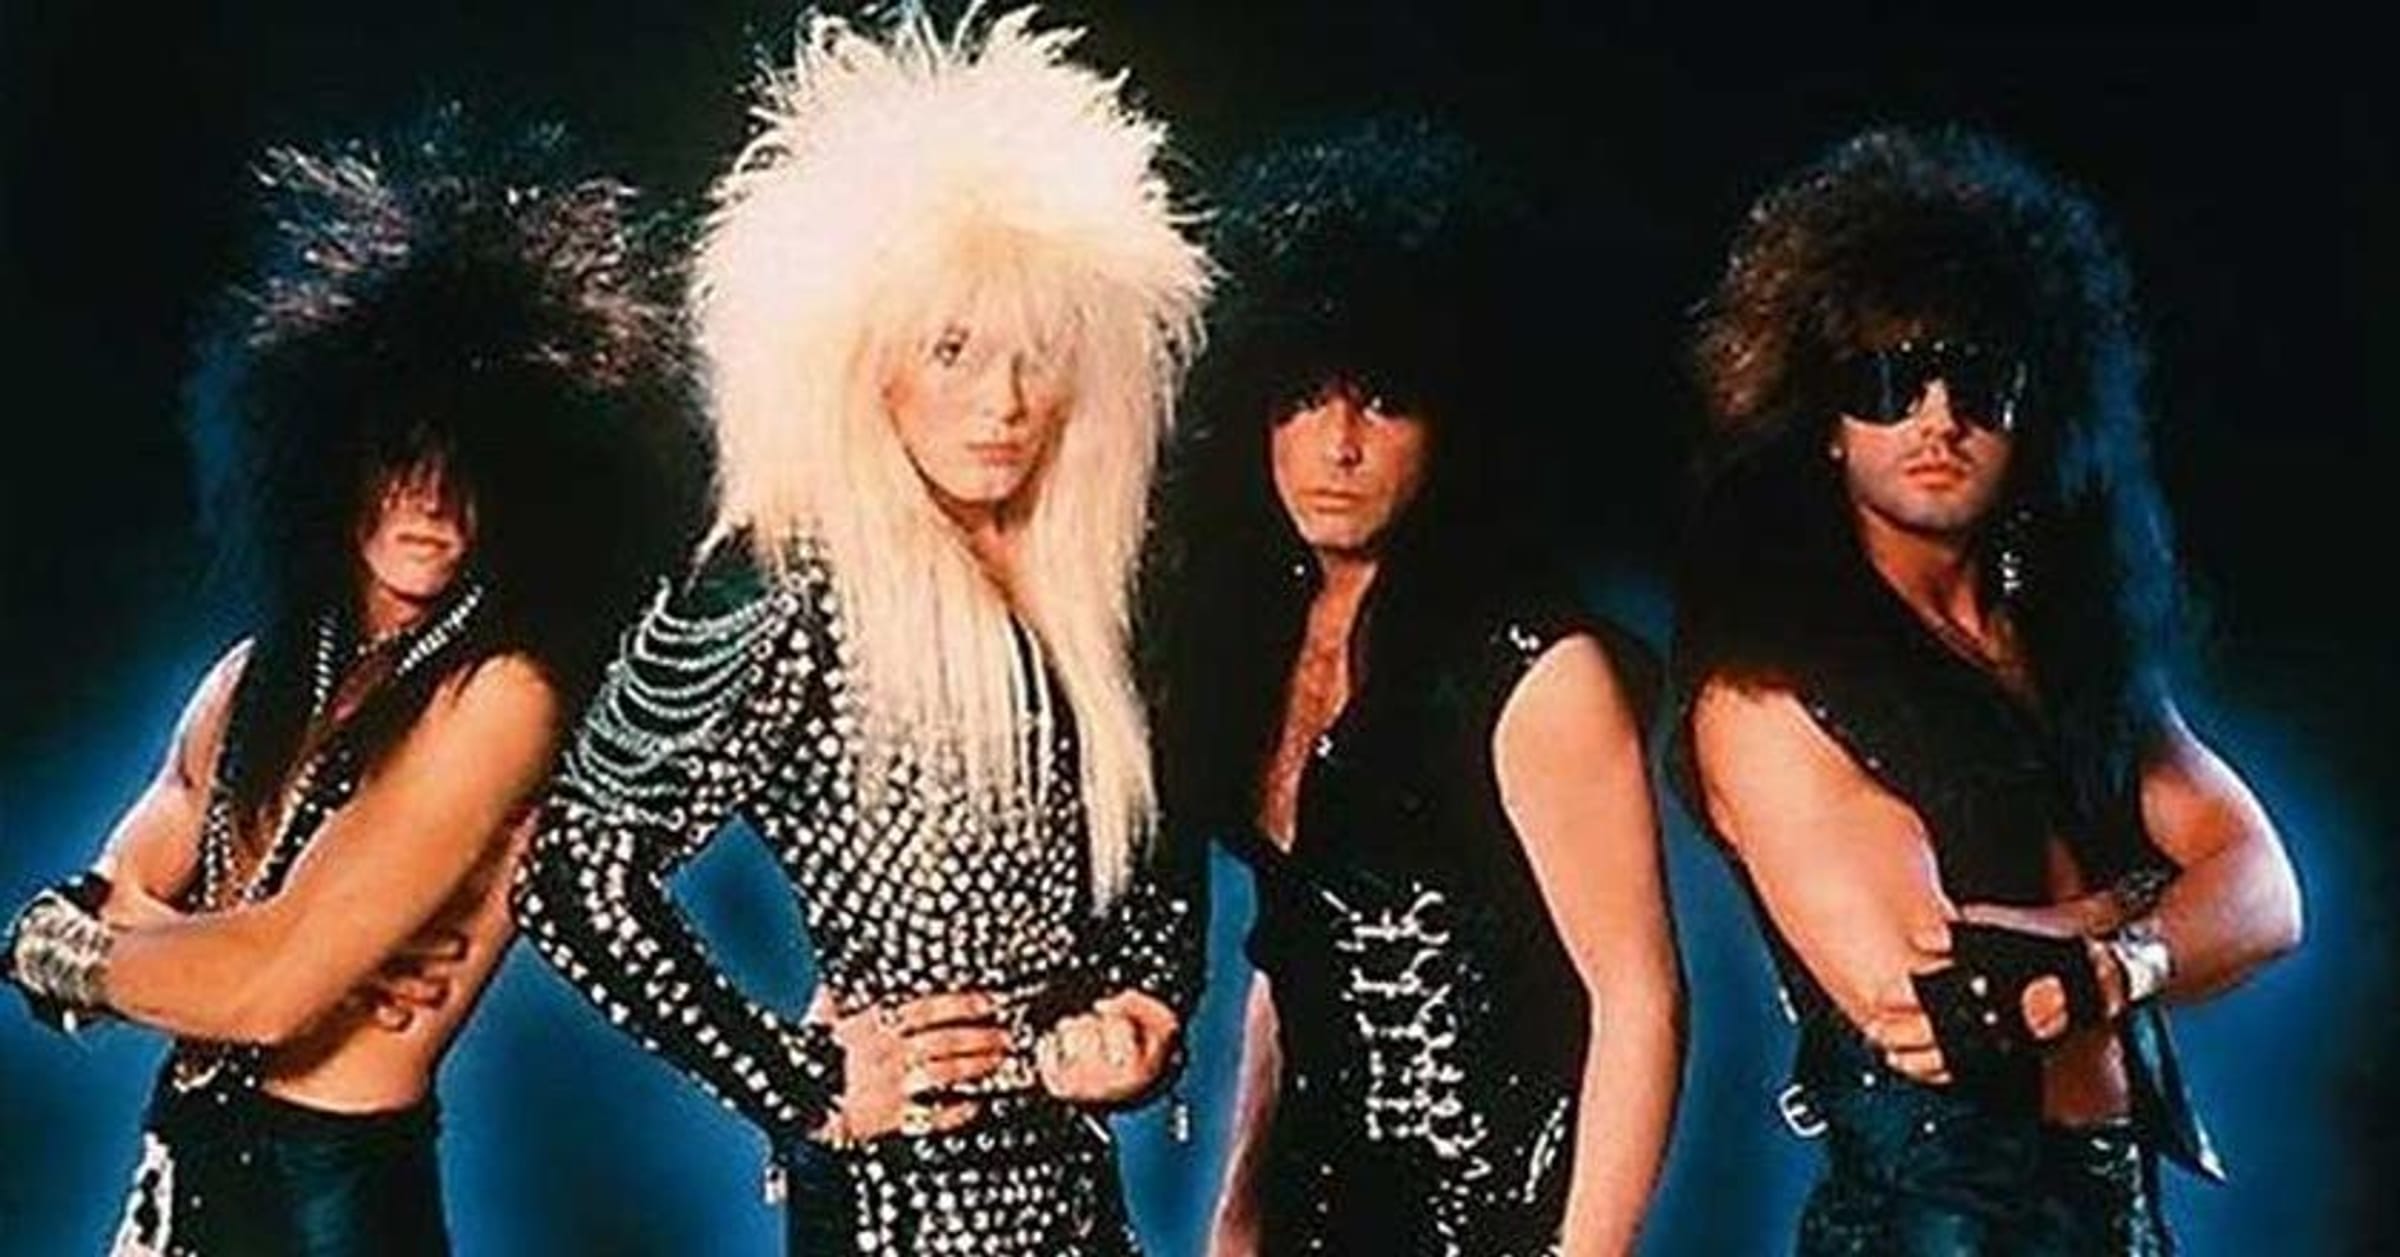 https://imgix.ranker.com/list_img_v2/1471/2421471/original/the-funniest-80-s-glam-band-photos-ever?fit=crop&fm=pjpg&q=80&dpr=2&w=1200&h=720